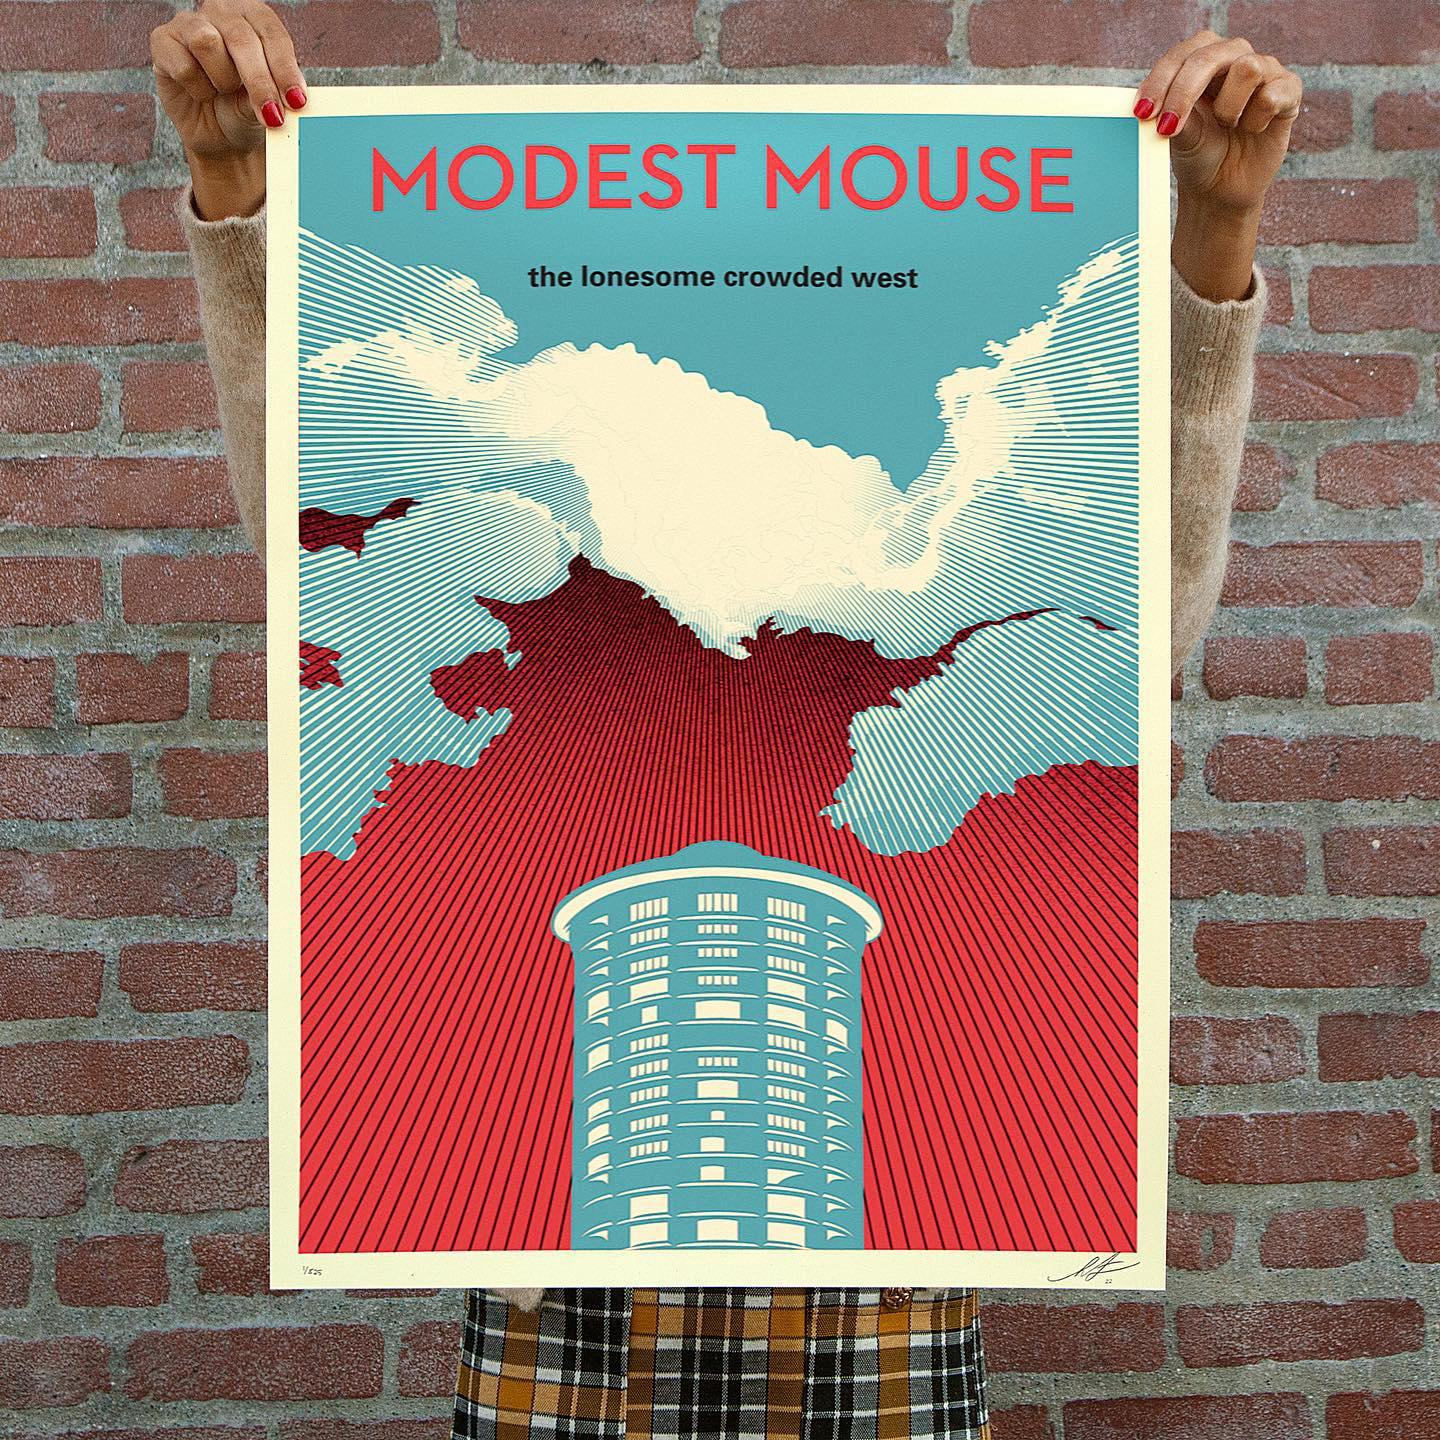 Shepard Fairey - I’m really happy that #modestmouse asked me to create some limited edition posters